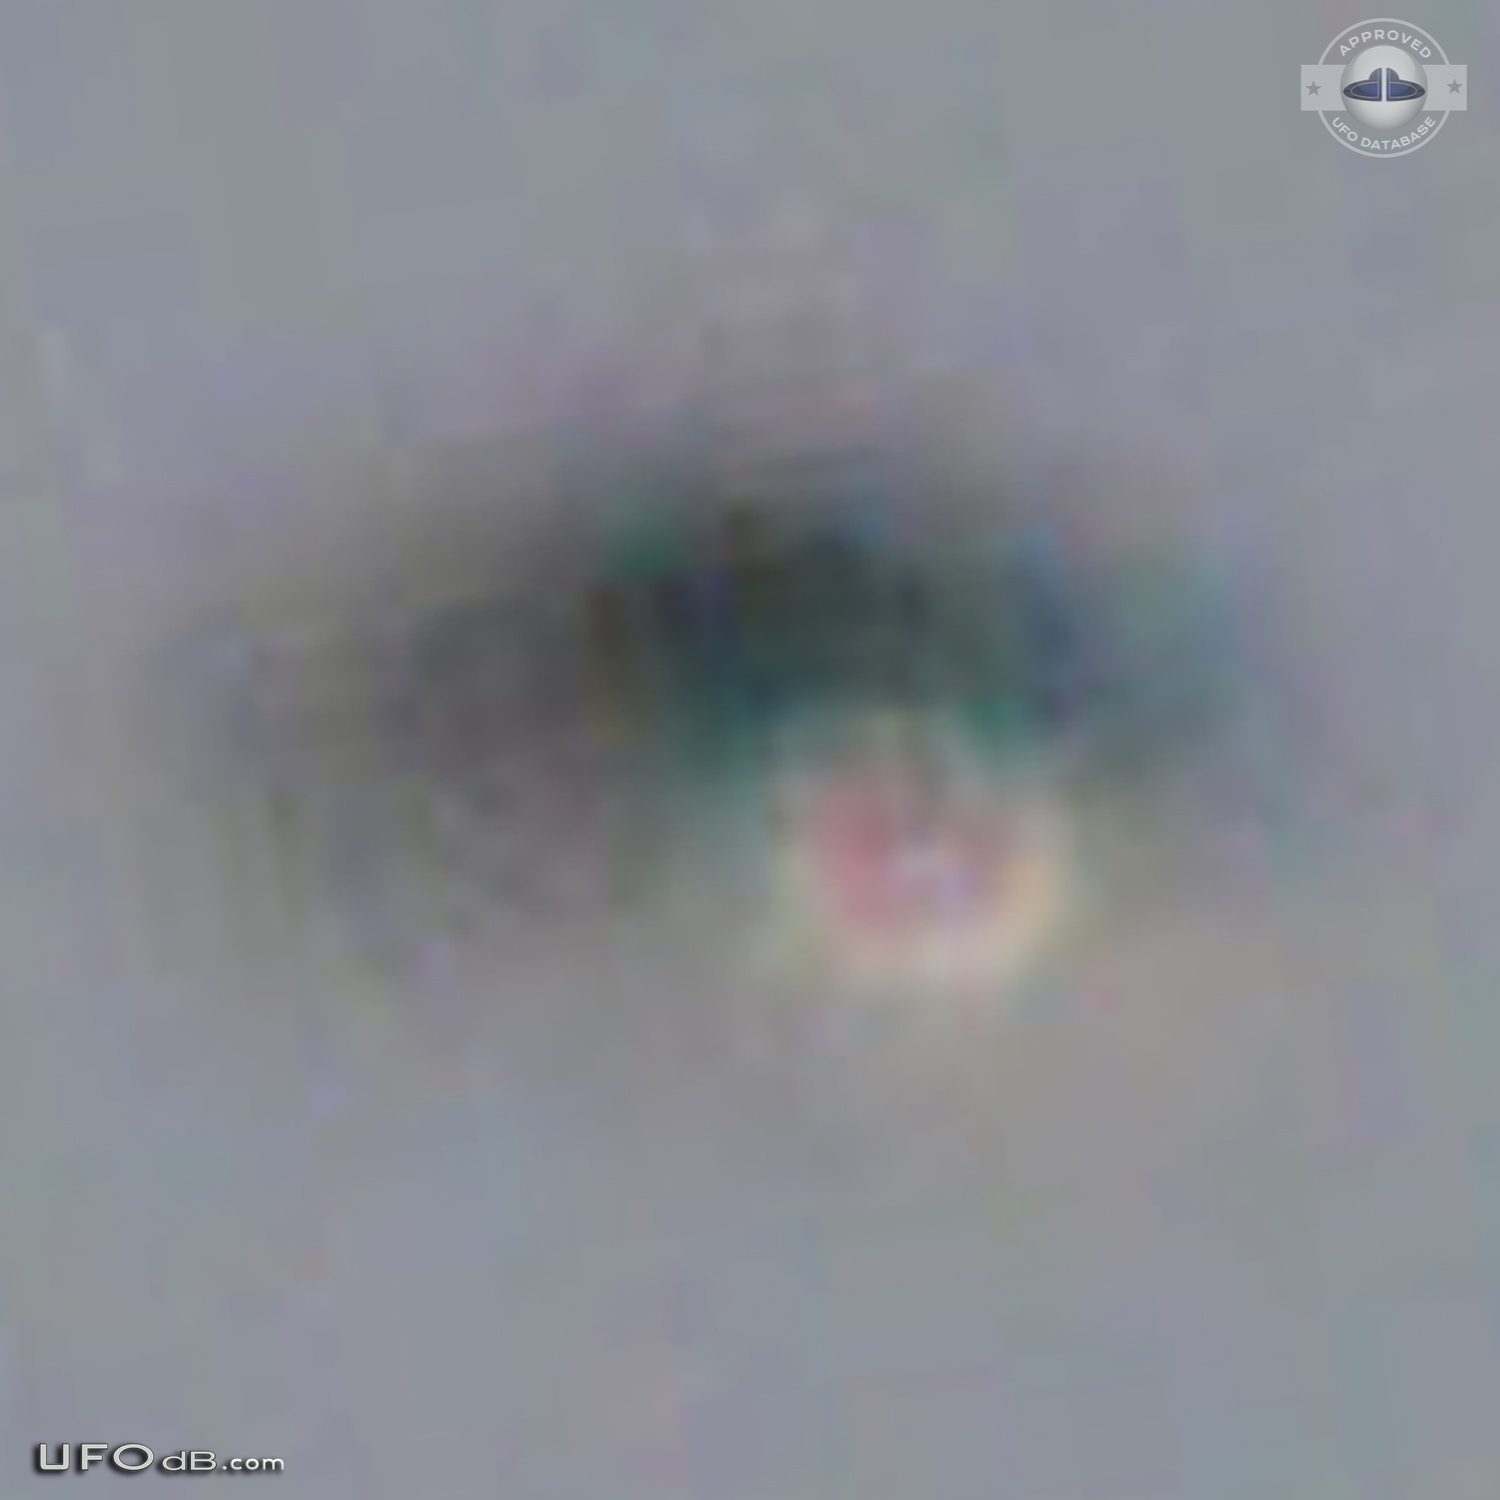 Shiny Upside-down Teardrop UFO rotating in the sky San Marcos CA USA UFO Picture #623-5